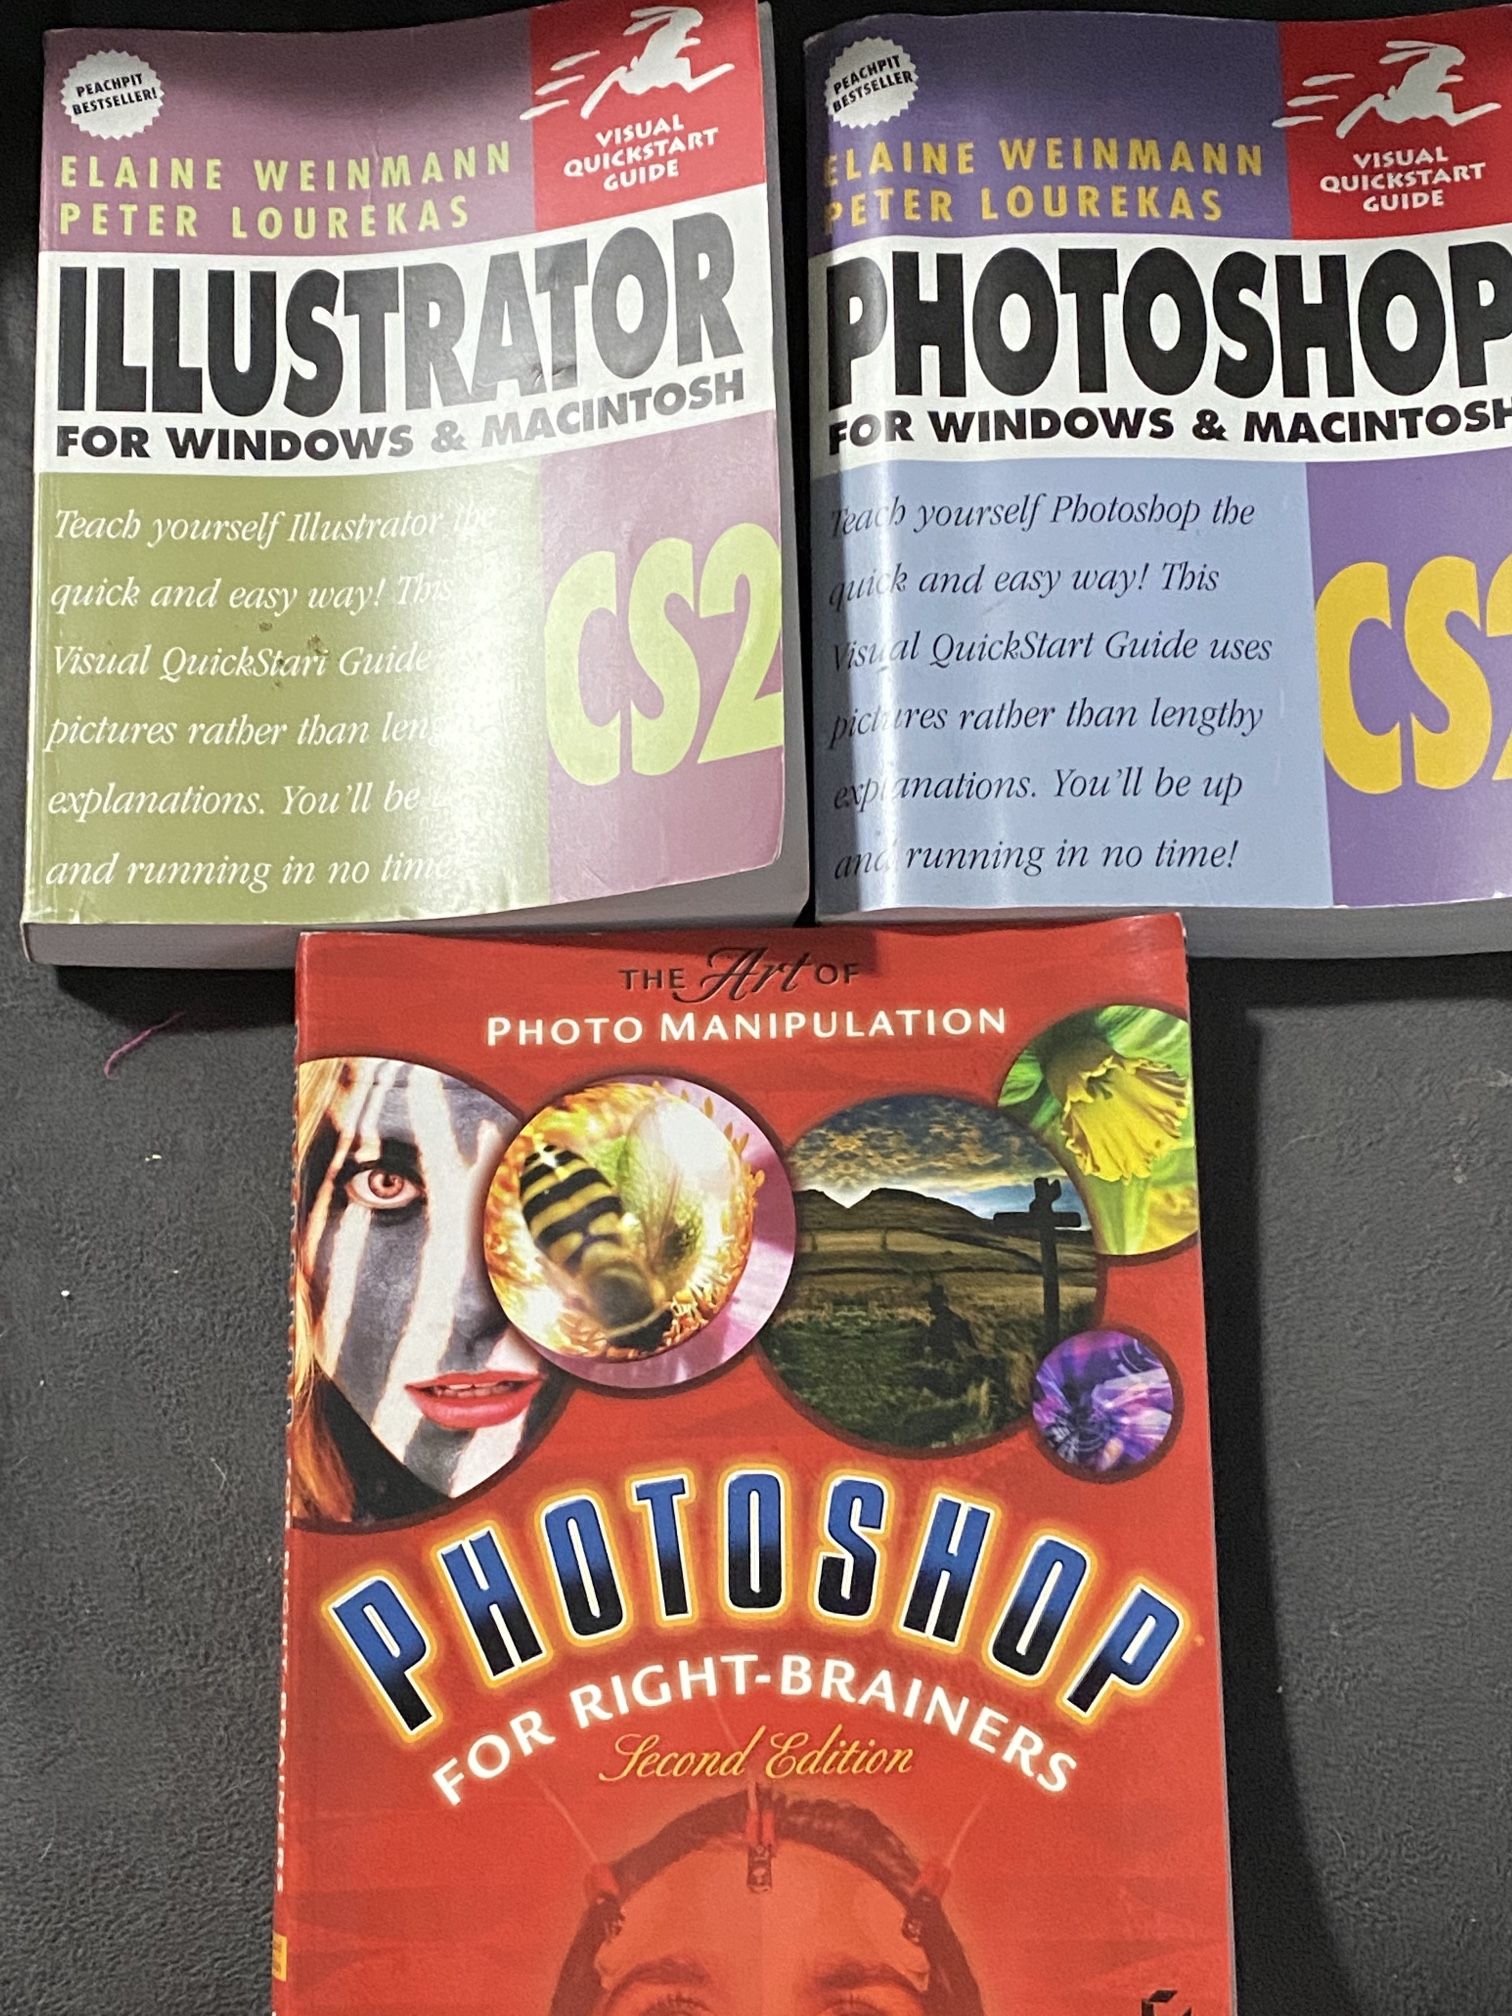 Illustrator & Photoshop books for CS2, like new, great condition. $5 each or $10 for all  Can meet by Park West off the 101 & Northern in Glendale